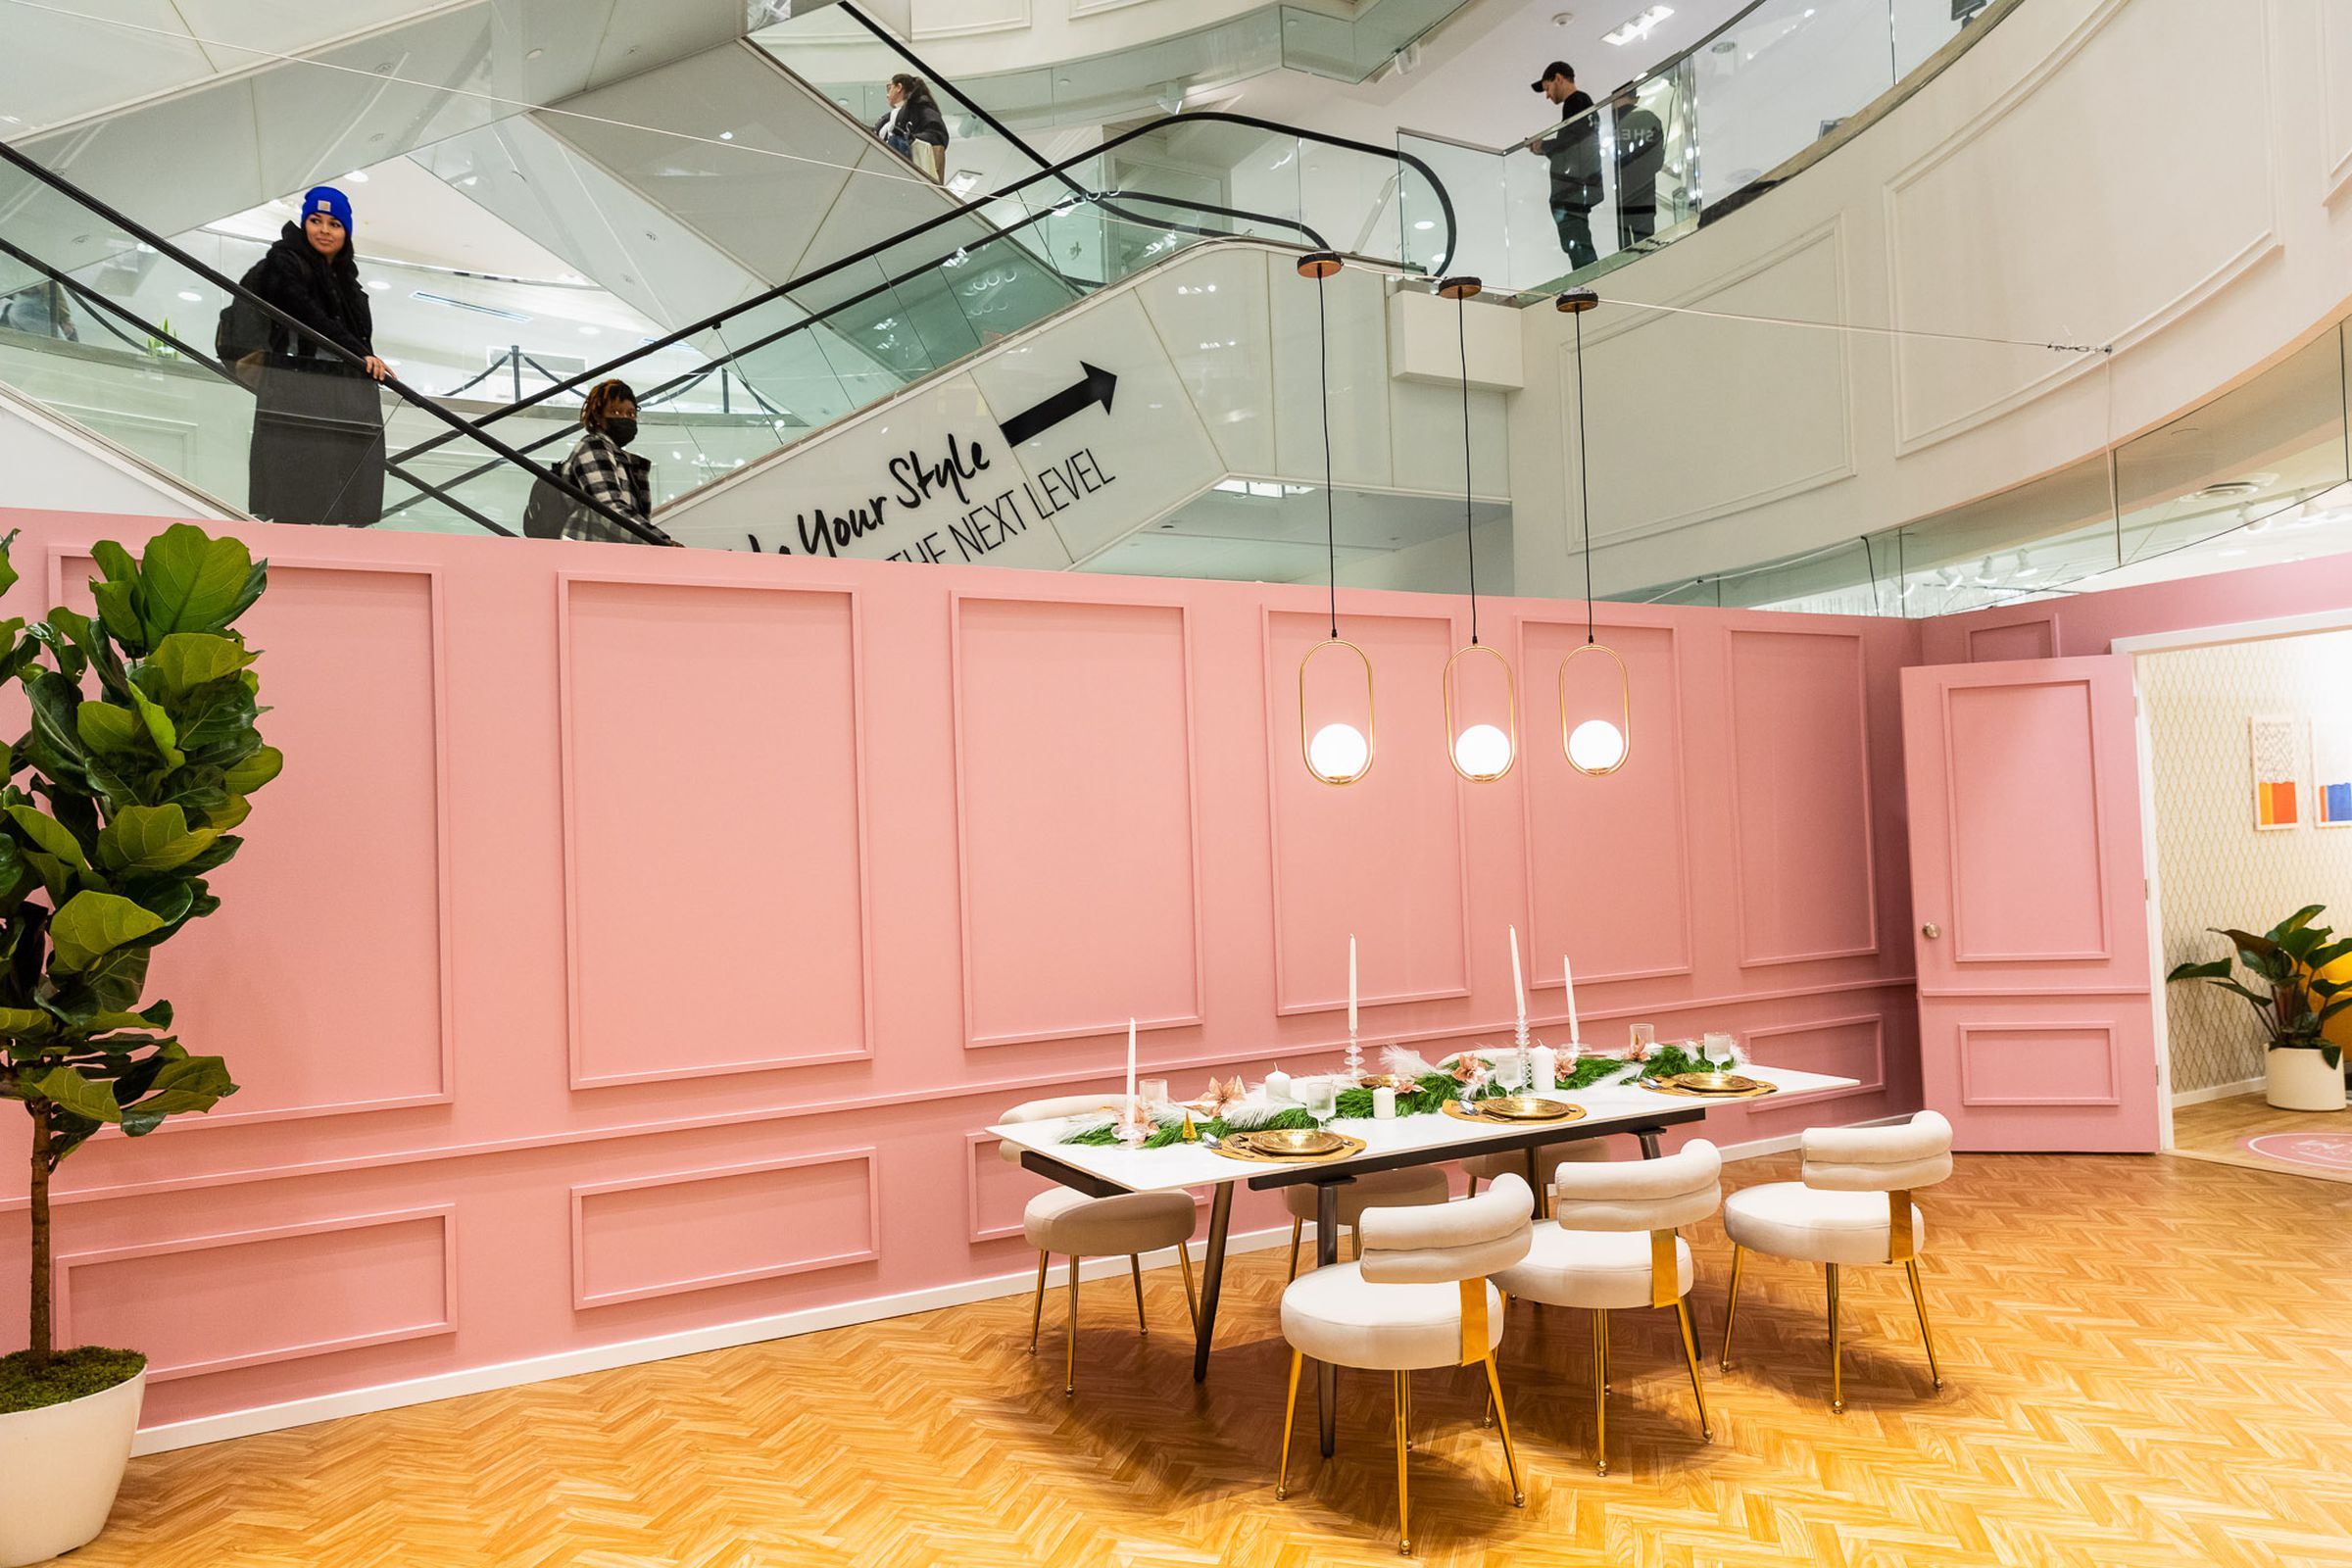 A pink walled room sits in the basement level of Forever 21. Right above where the wall ends, a woman is descending the escalator, looking into the pop-up space.